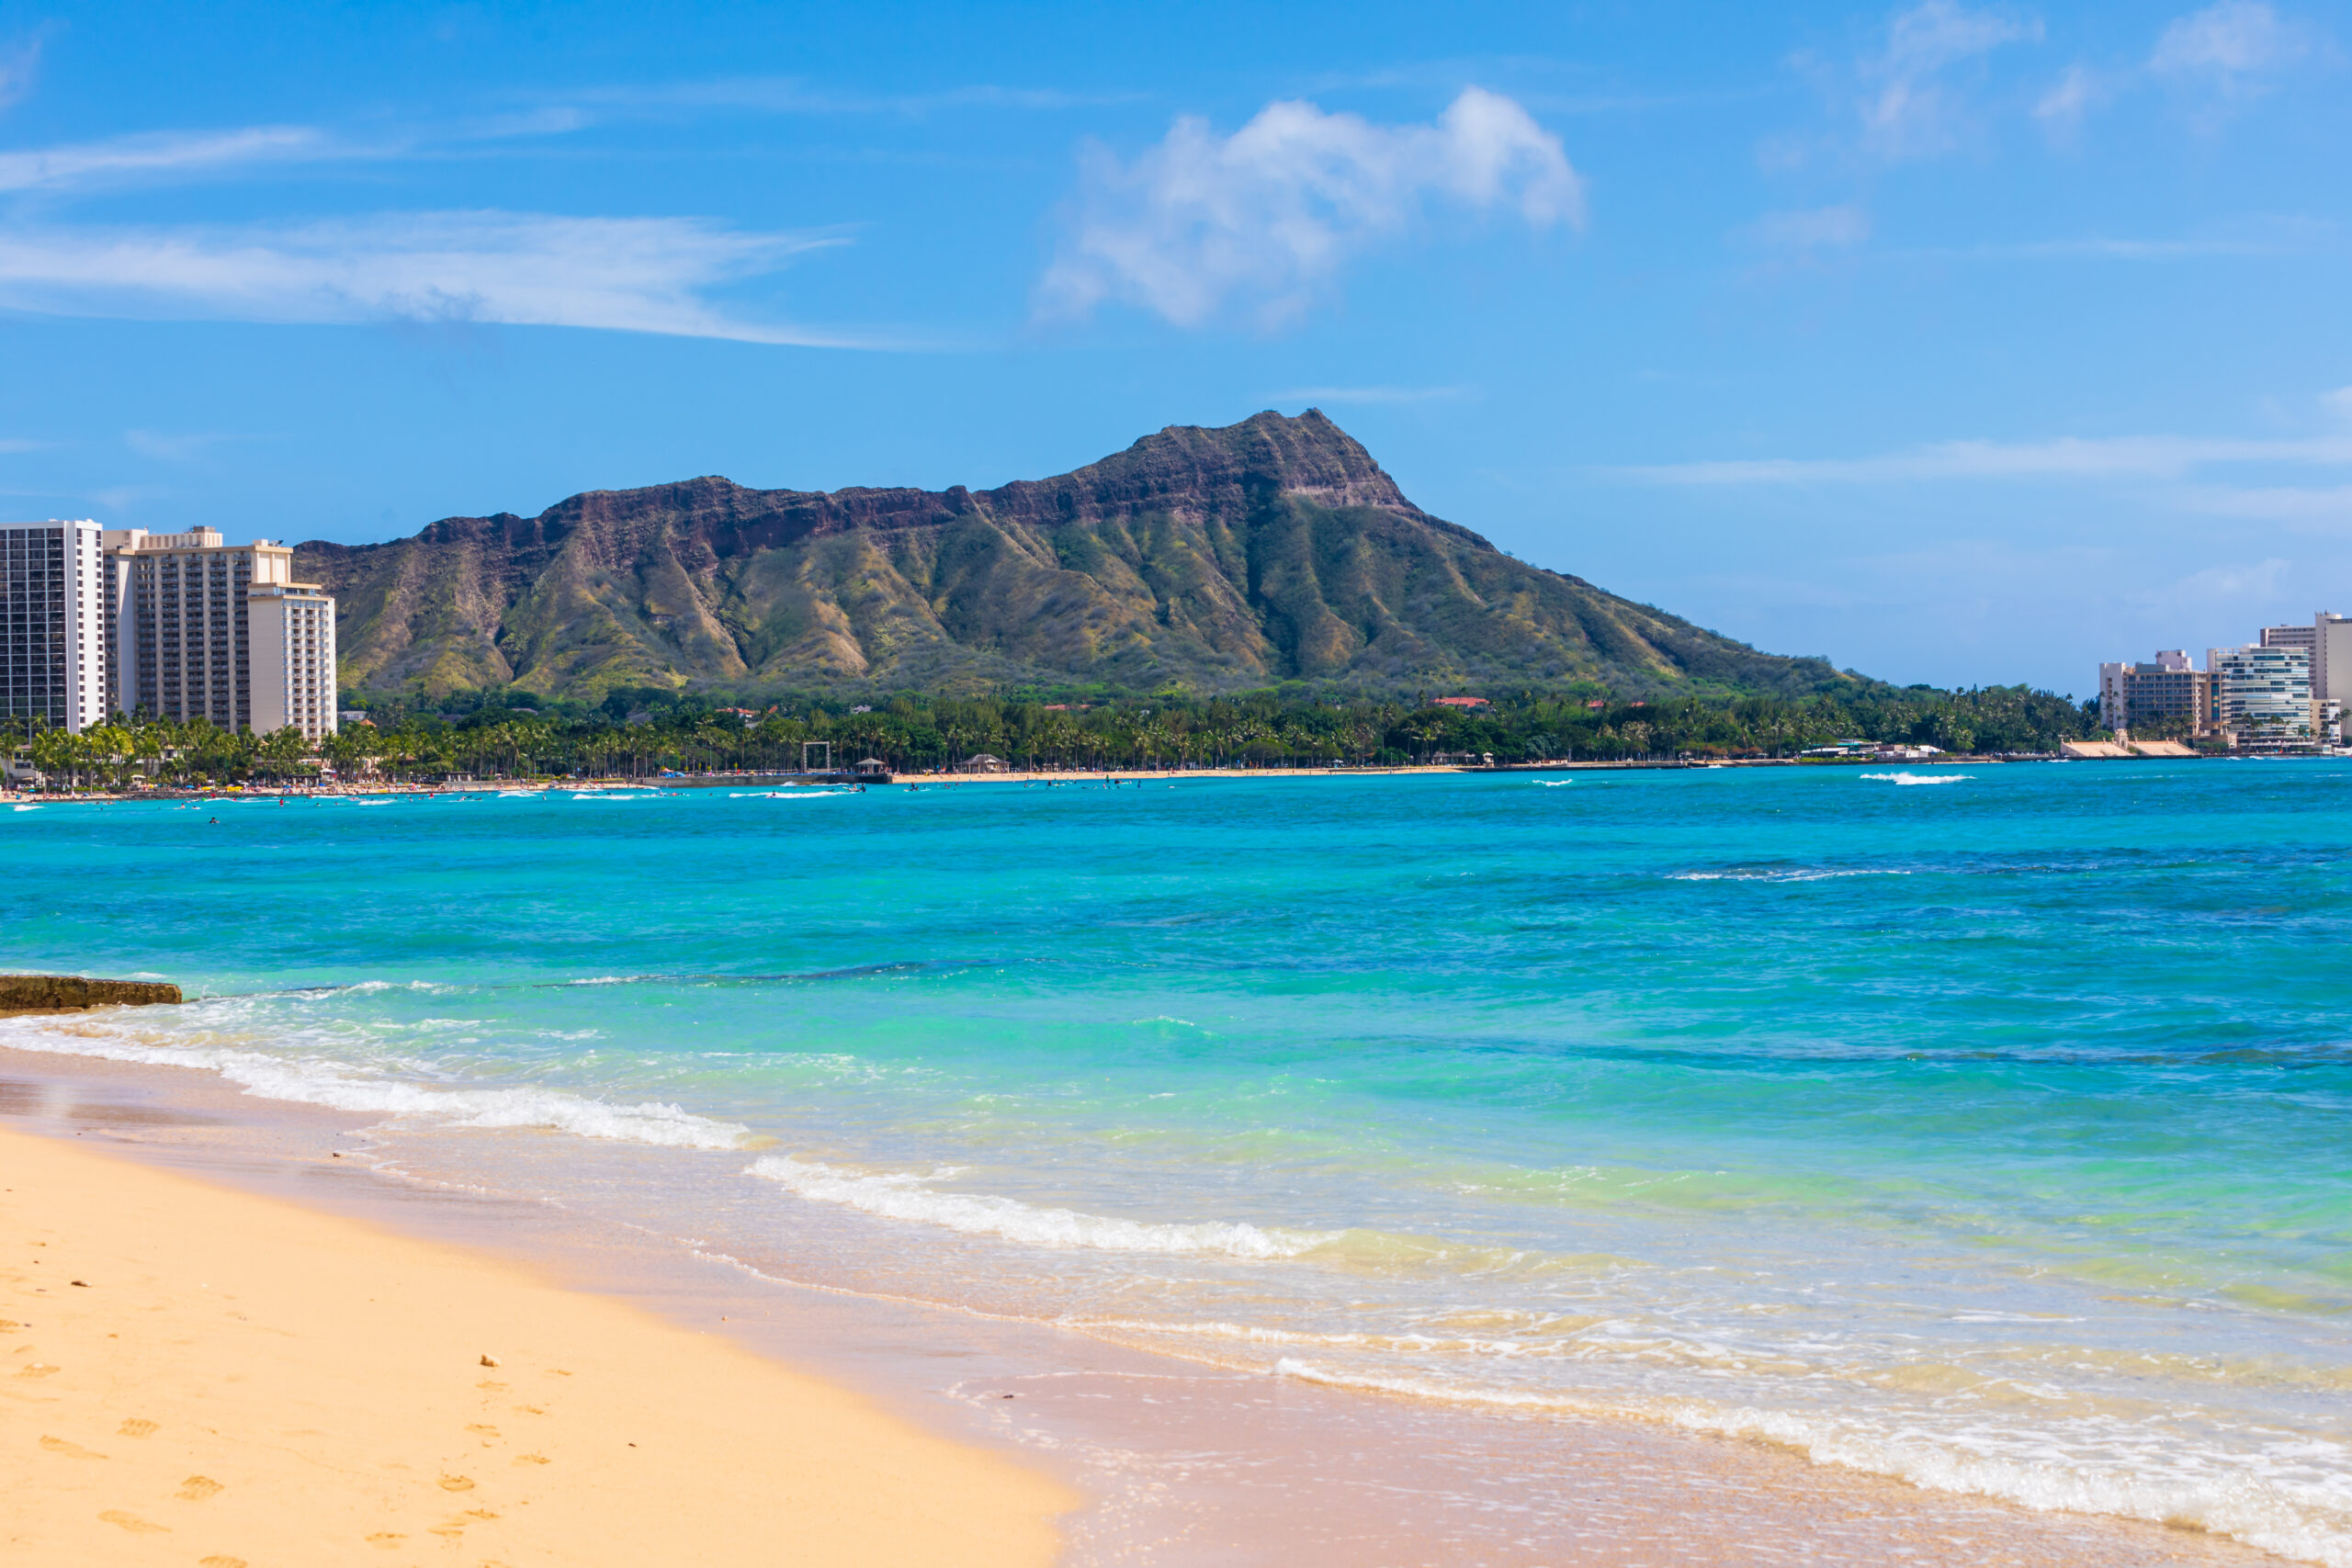 Photo of Diamond Head taken from Waikiki with ocean in and sandy beach in forefront.